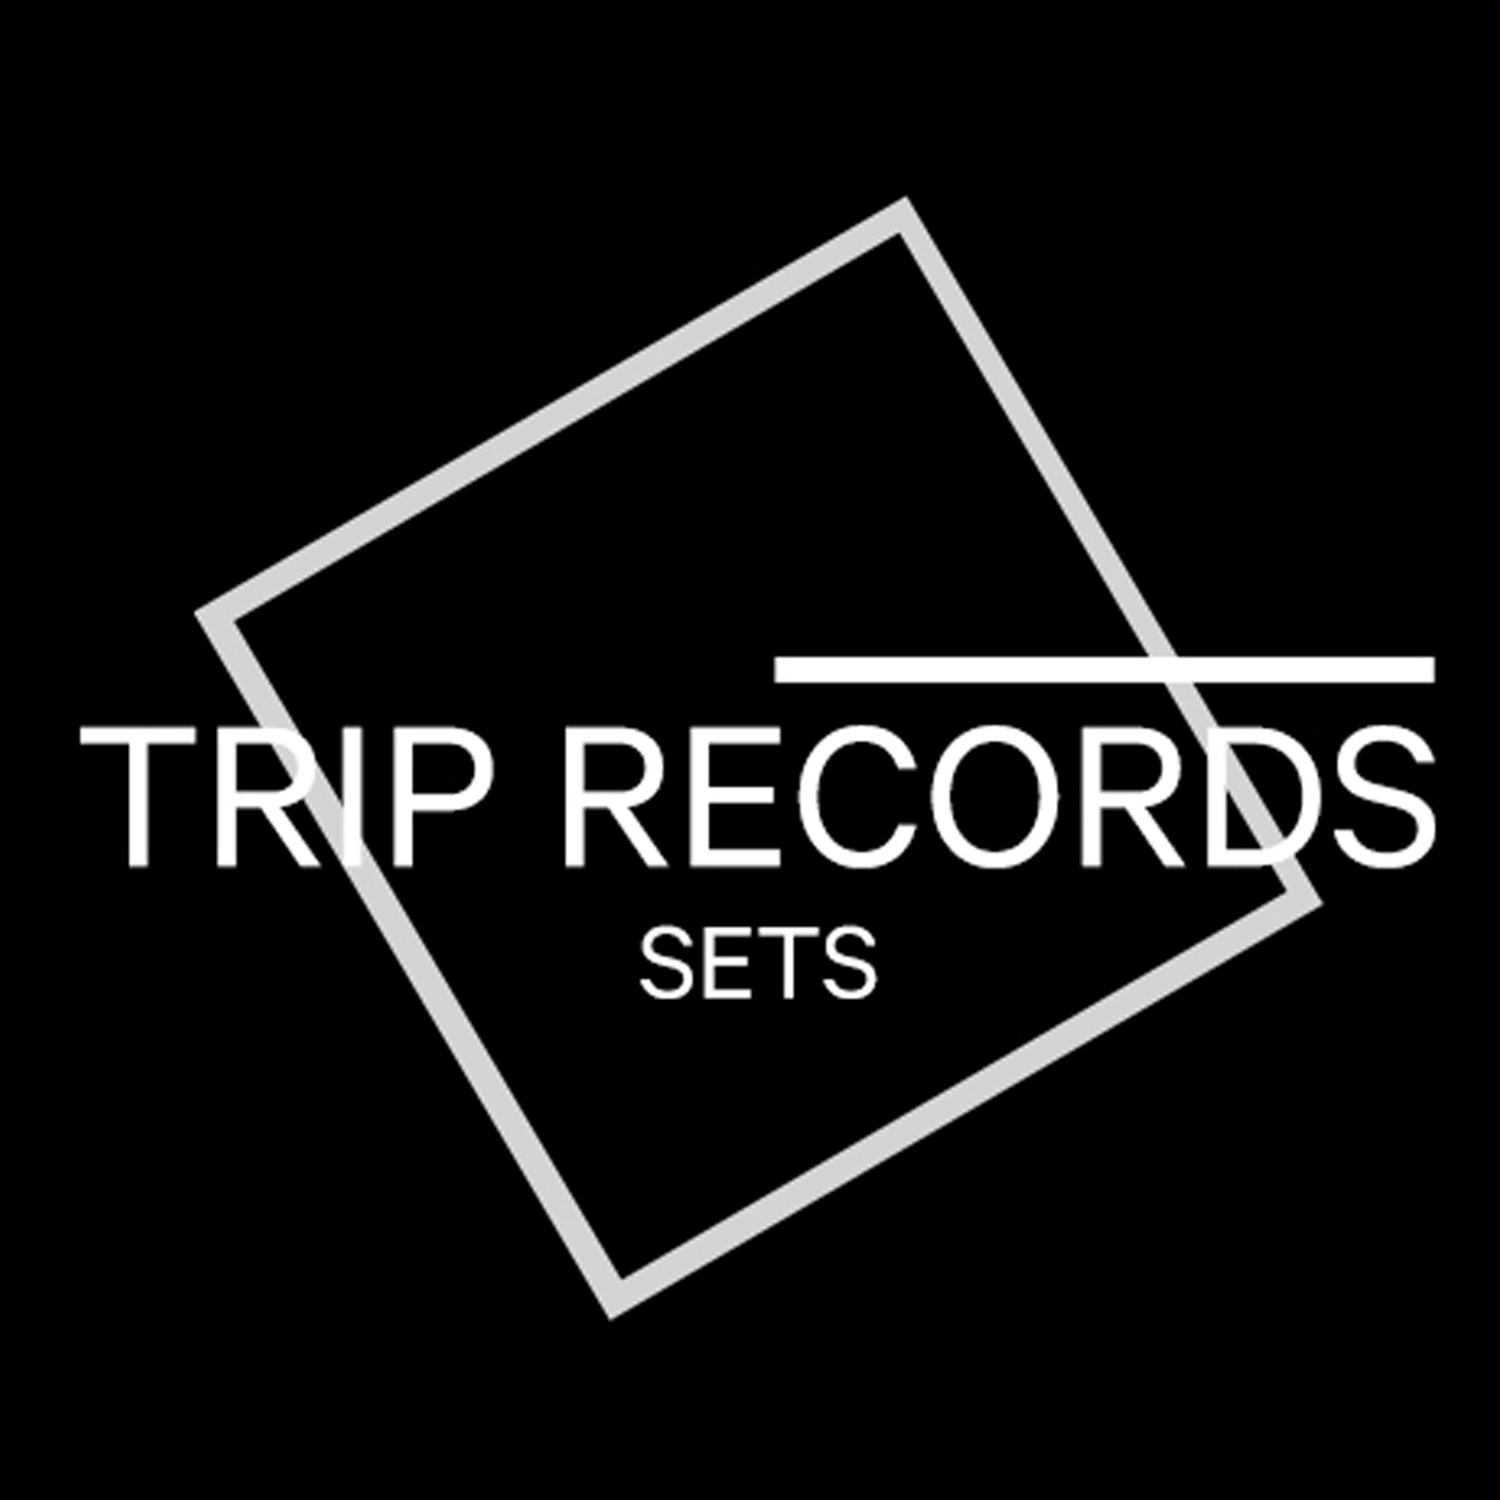 Trip Records Sets - The best Dj set of Techno, Deep, House, Chillout, Progressive, Electronic, Dance, Melodic